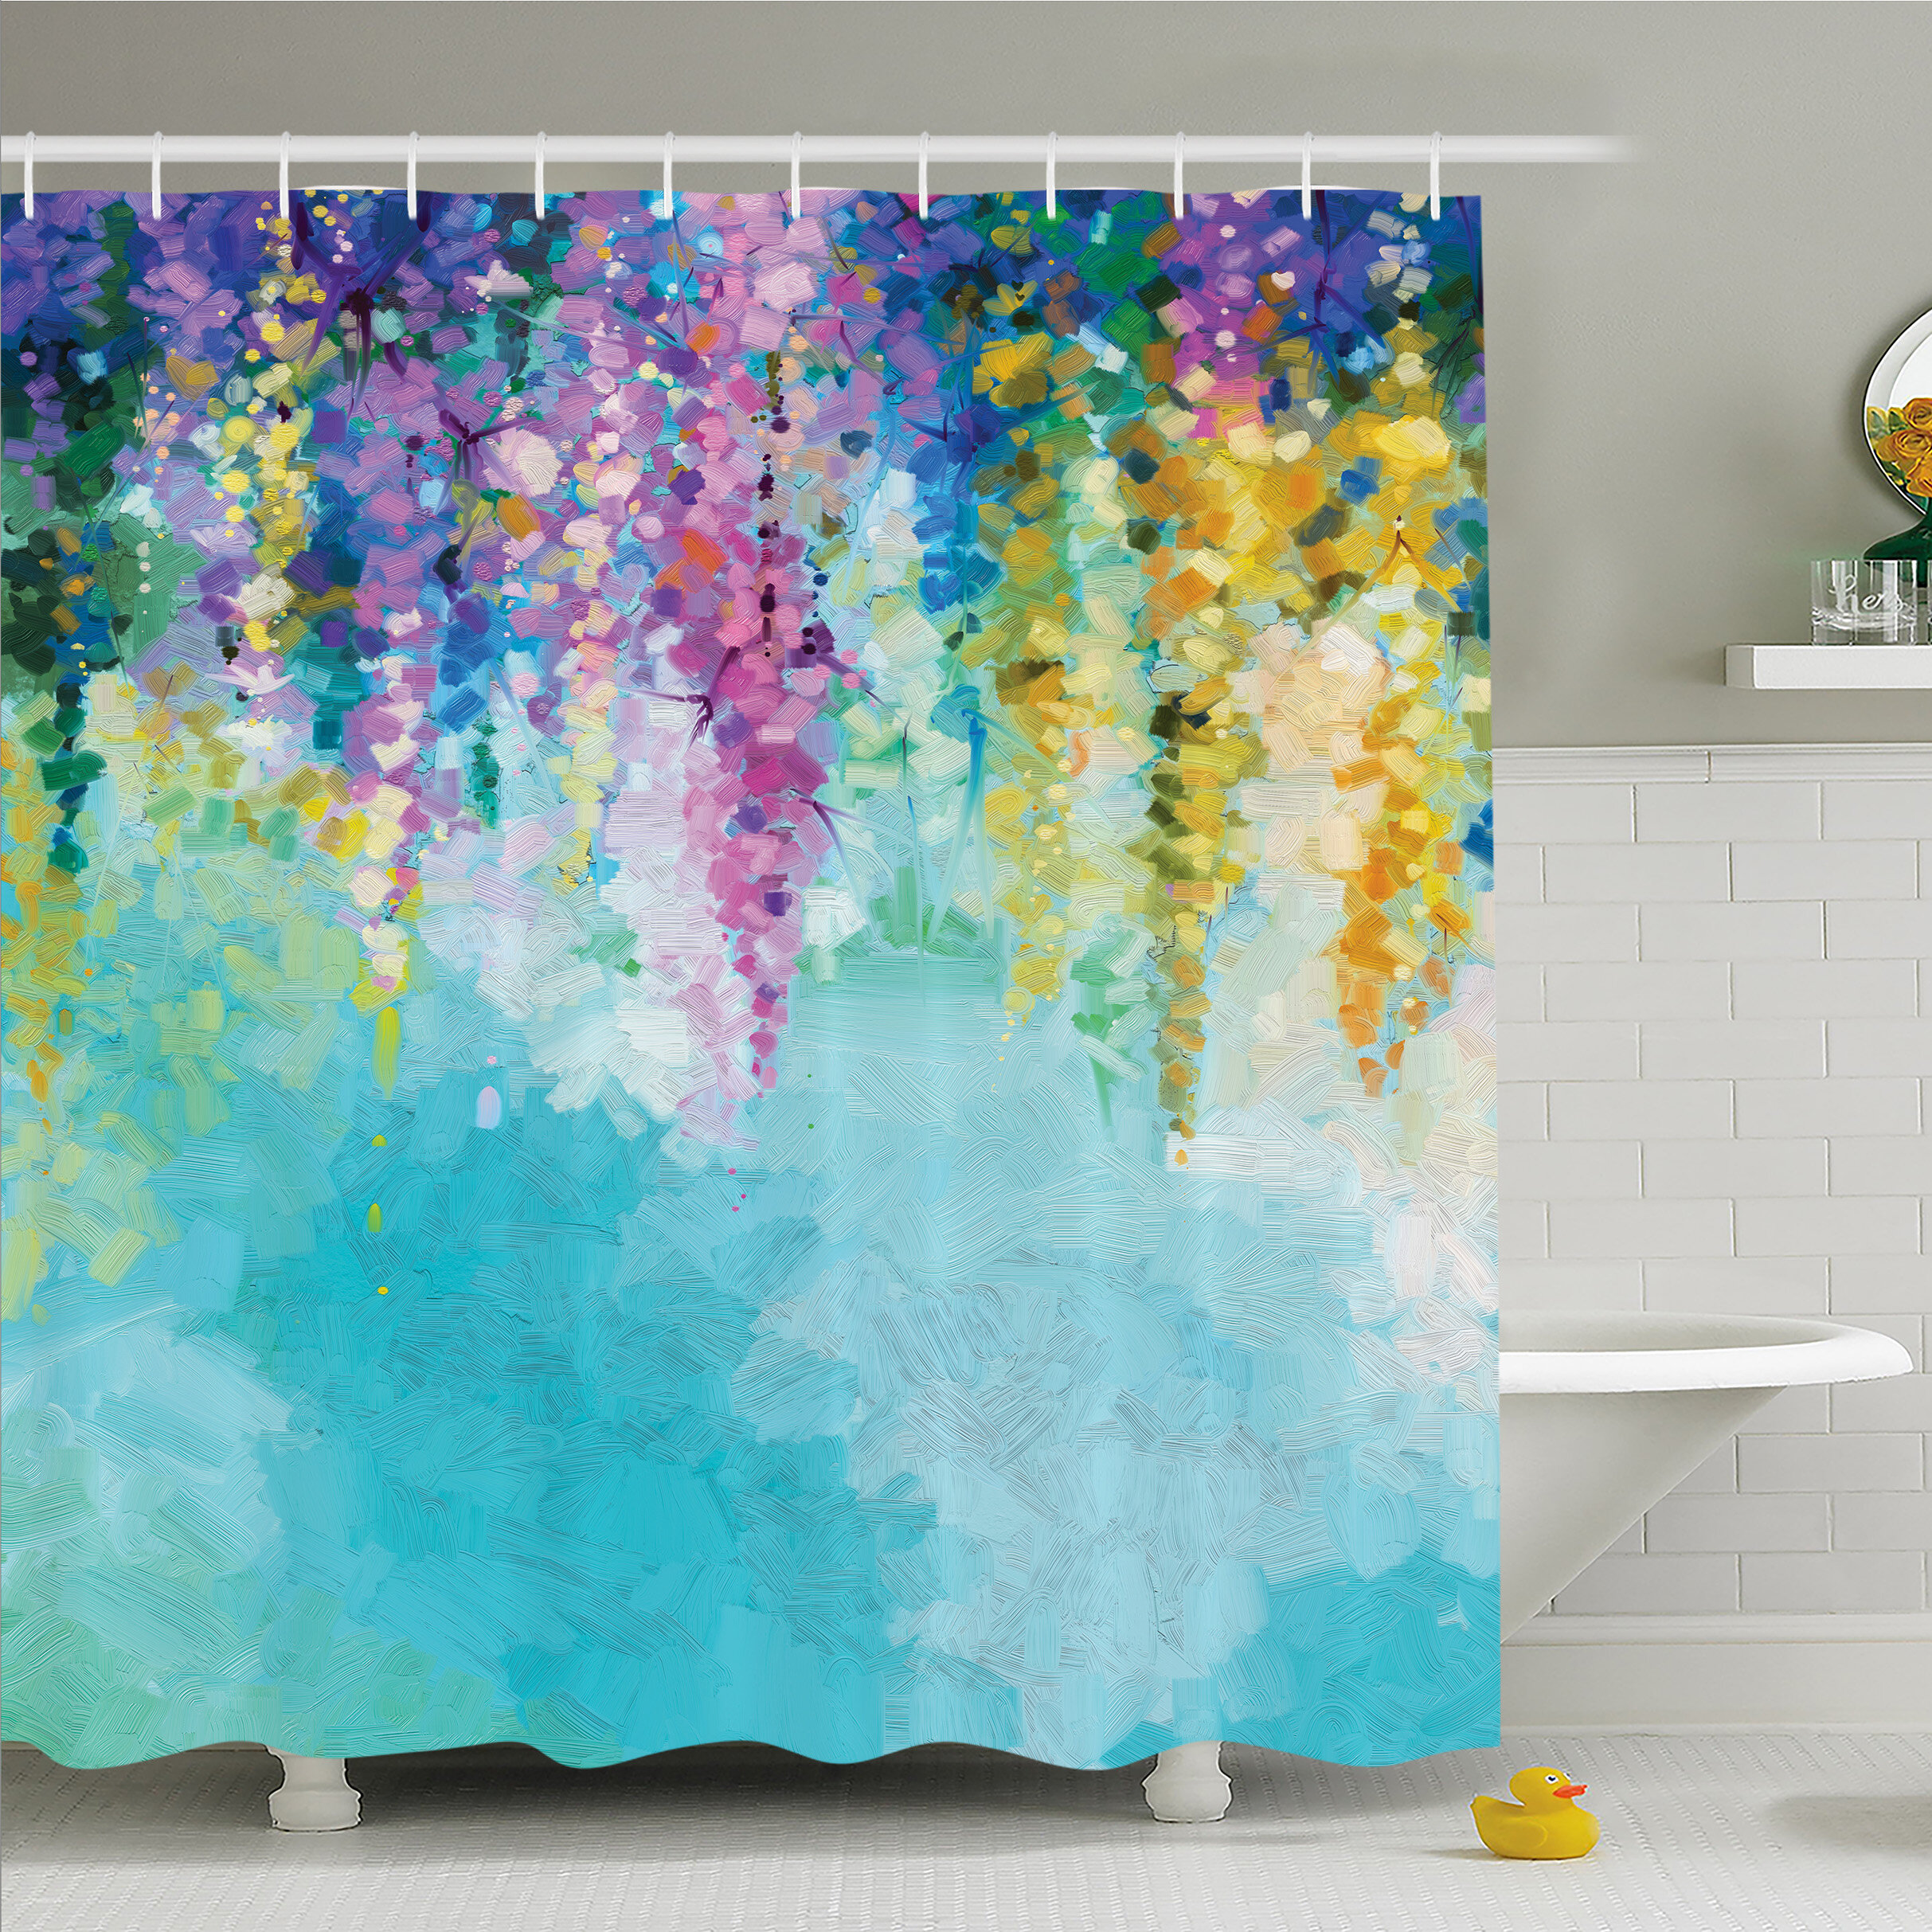 Flower Bath Shower Curtain Set Abstract Watercolor Floral Toilet Cover Mat Rug 